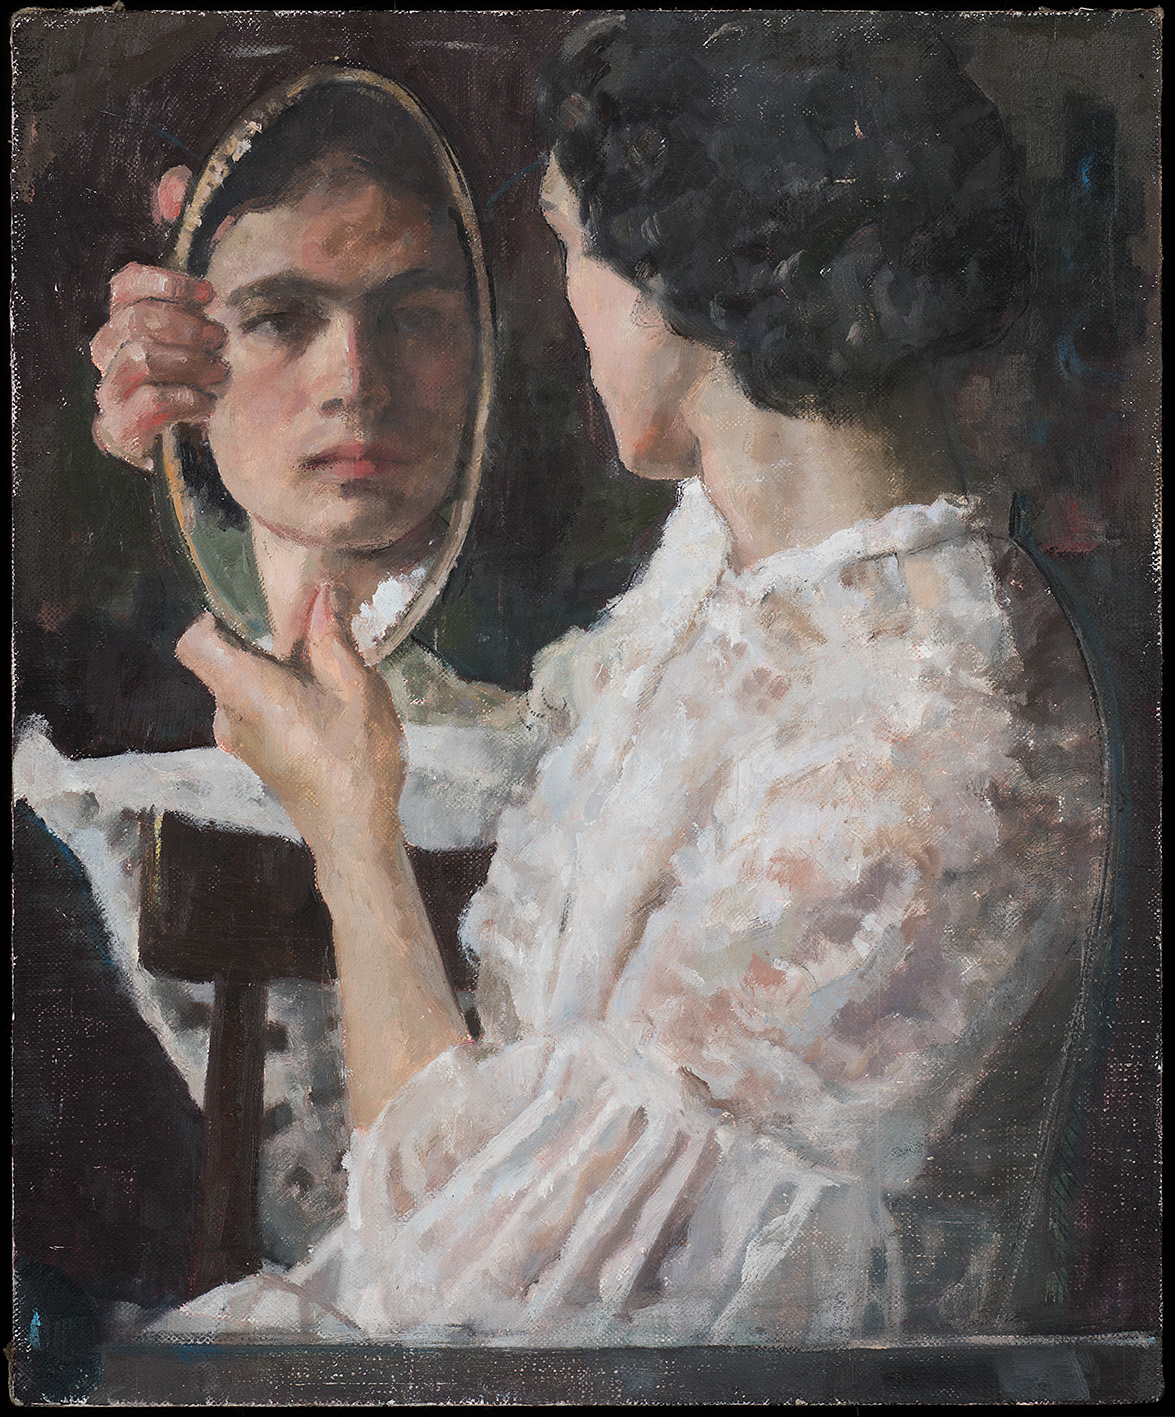 Roni Taharlev, “Holding a Mirror,” 2020, Oil on linen mounted on panel, 50 × 60 cm